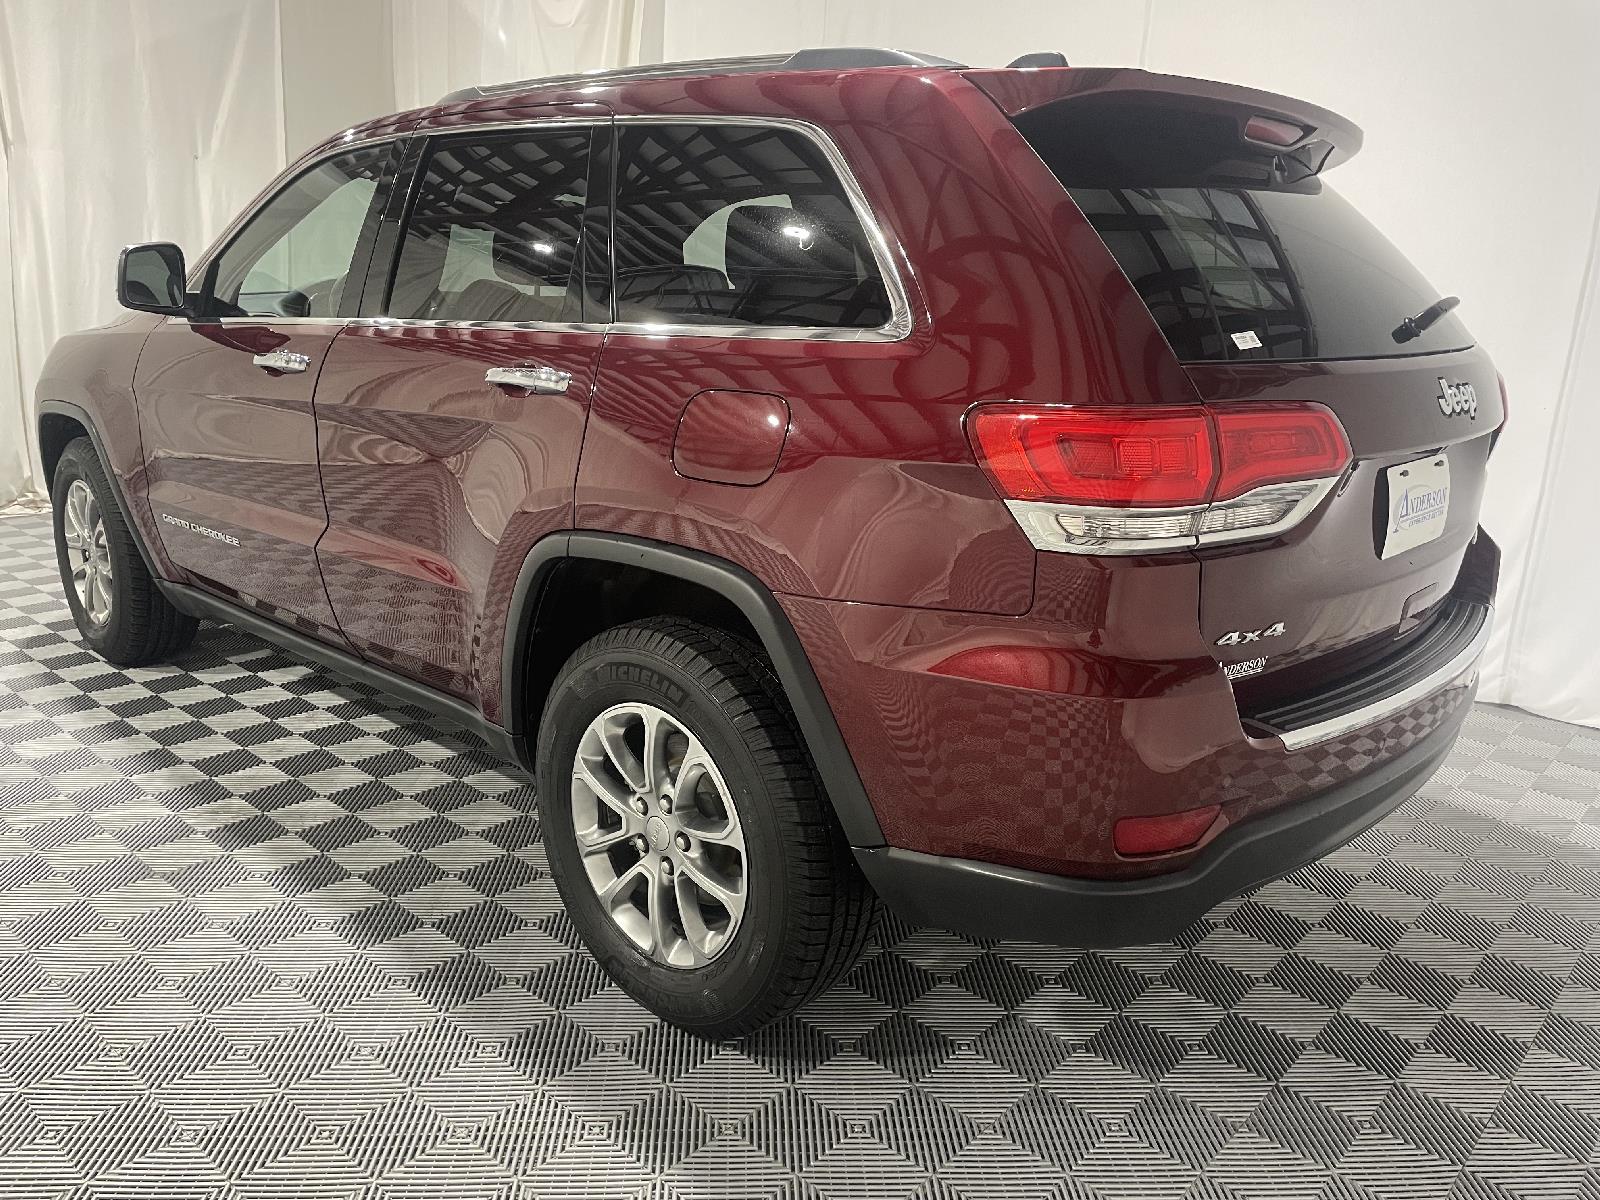 Used 2016 Jeep Grand Cherokee Limited SUV for sale in St Joseph MO